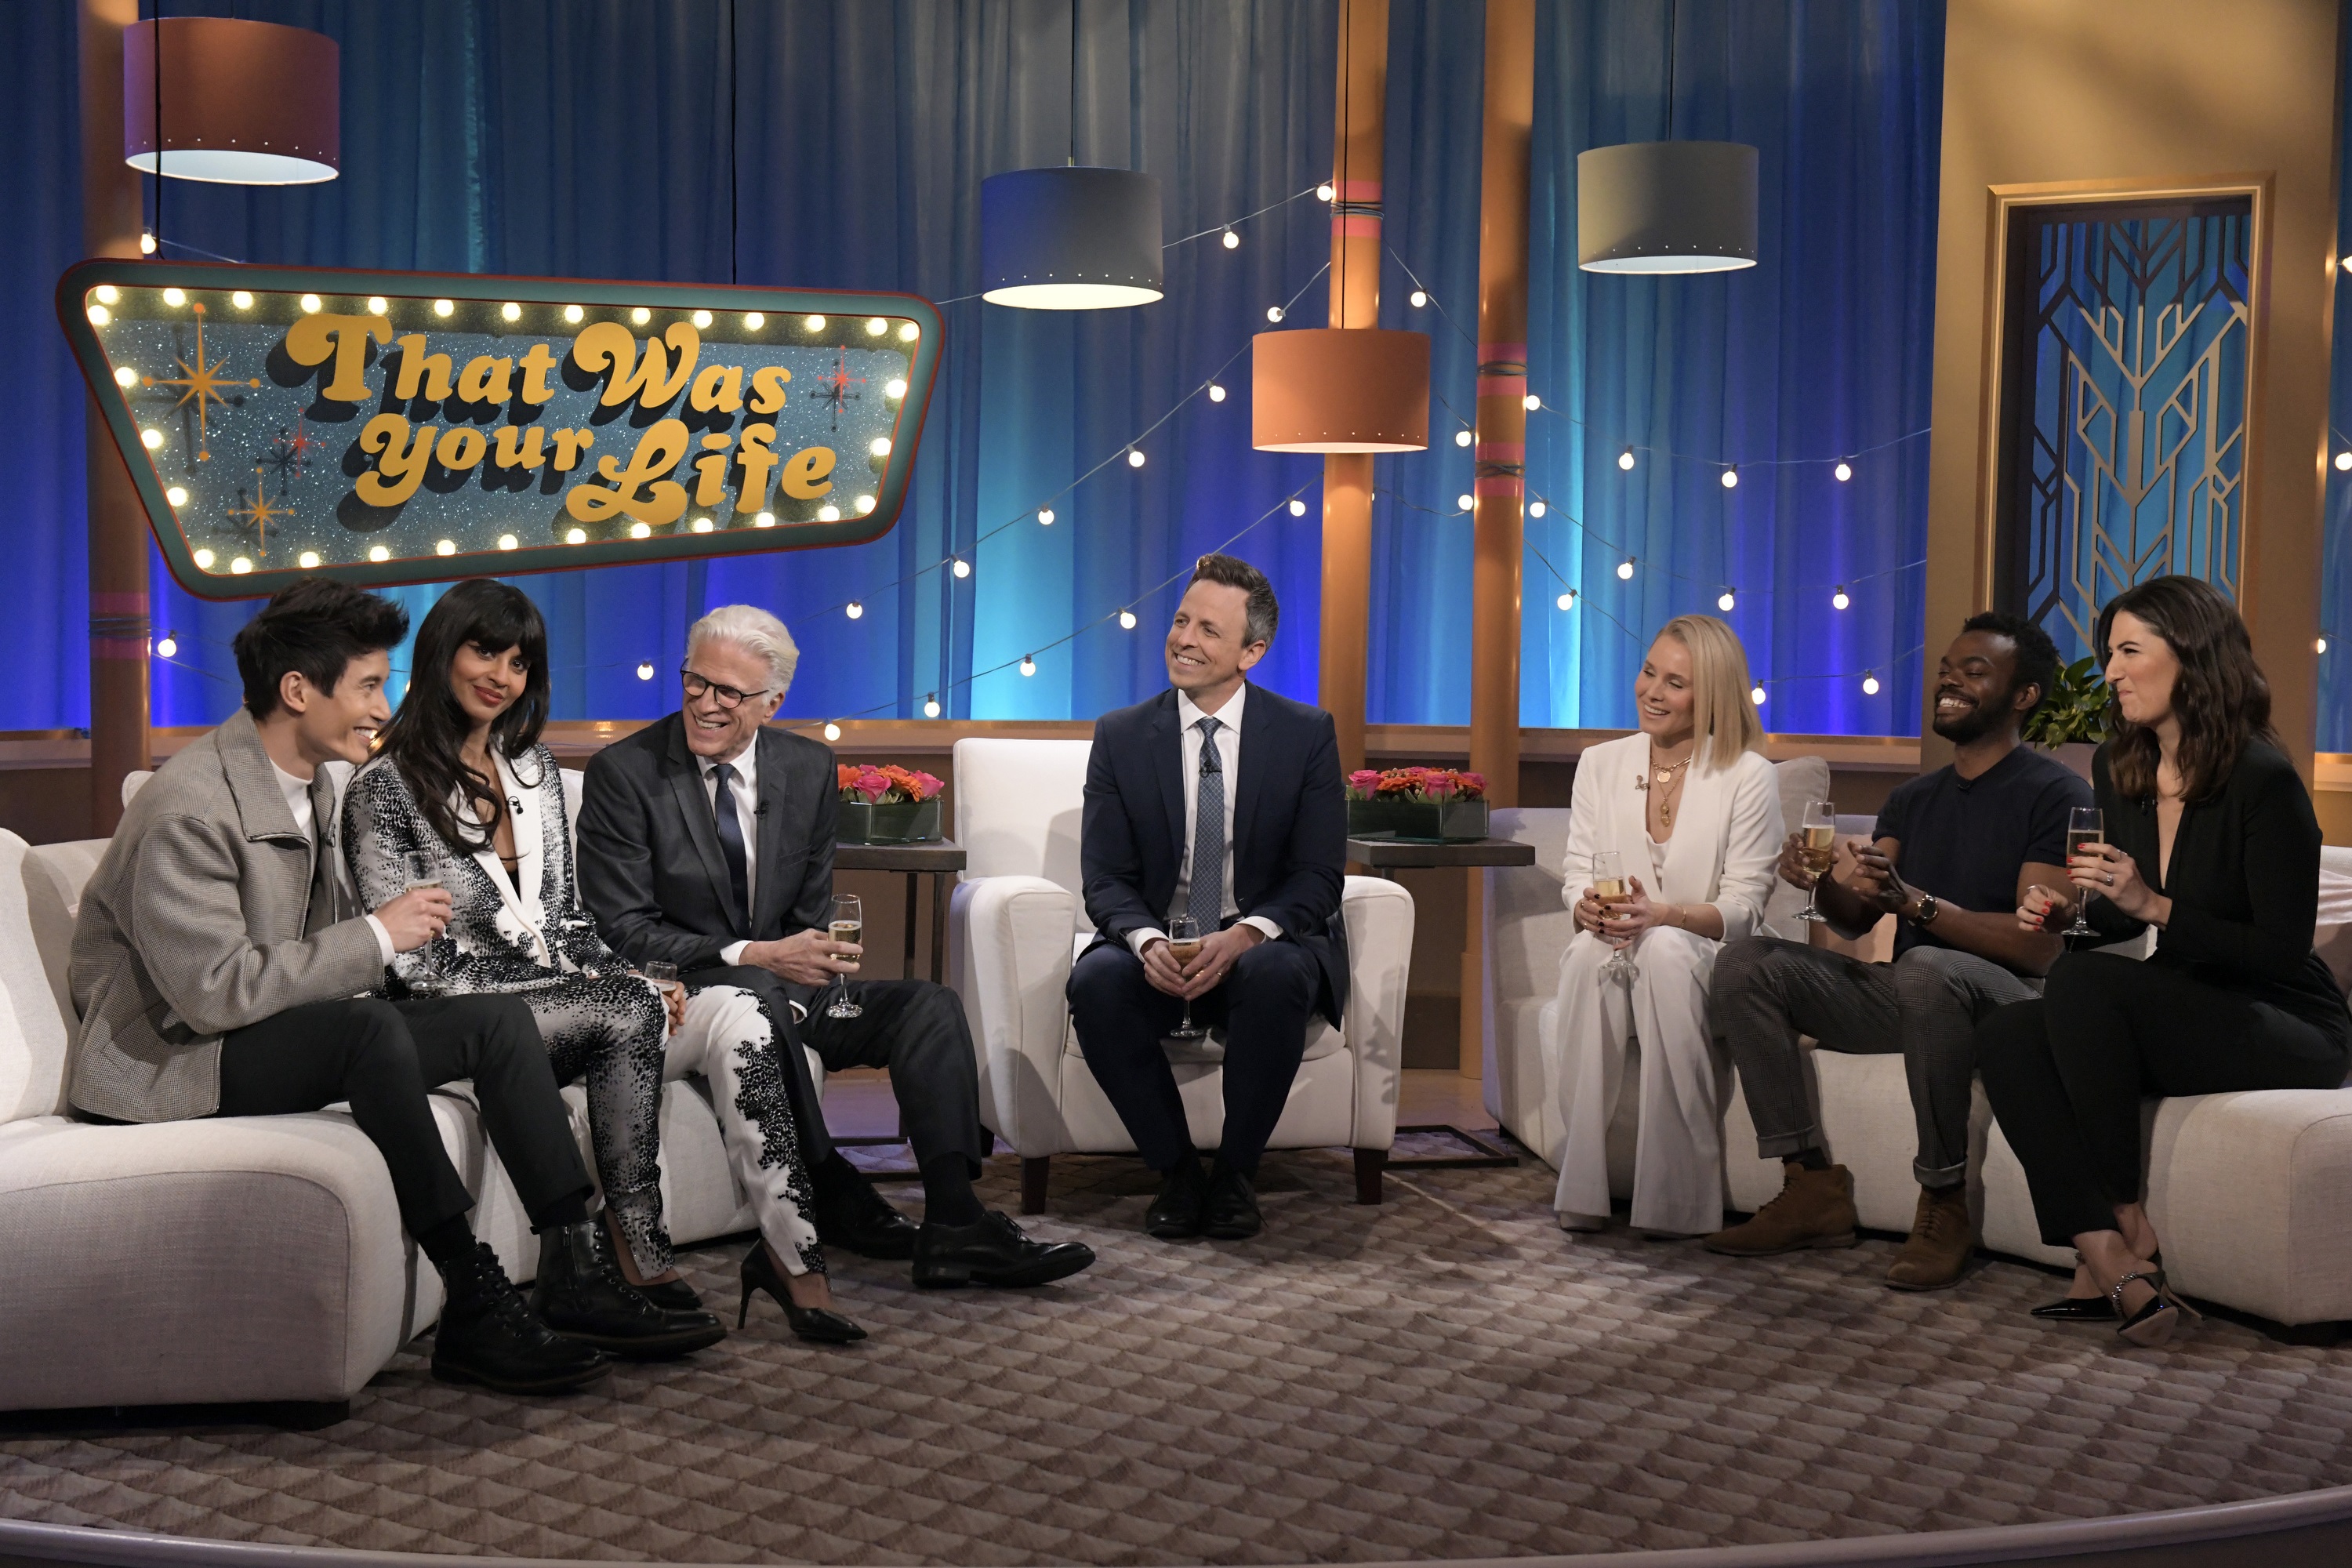 'The Good Place' stars Manny Jacinto, Jameela Jamil, Ted Danson, Seth Meyers, Kristen Bell, William Jackson Harper, and D'Arcy Carden